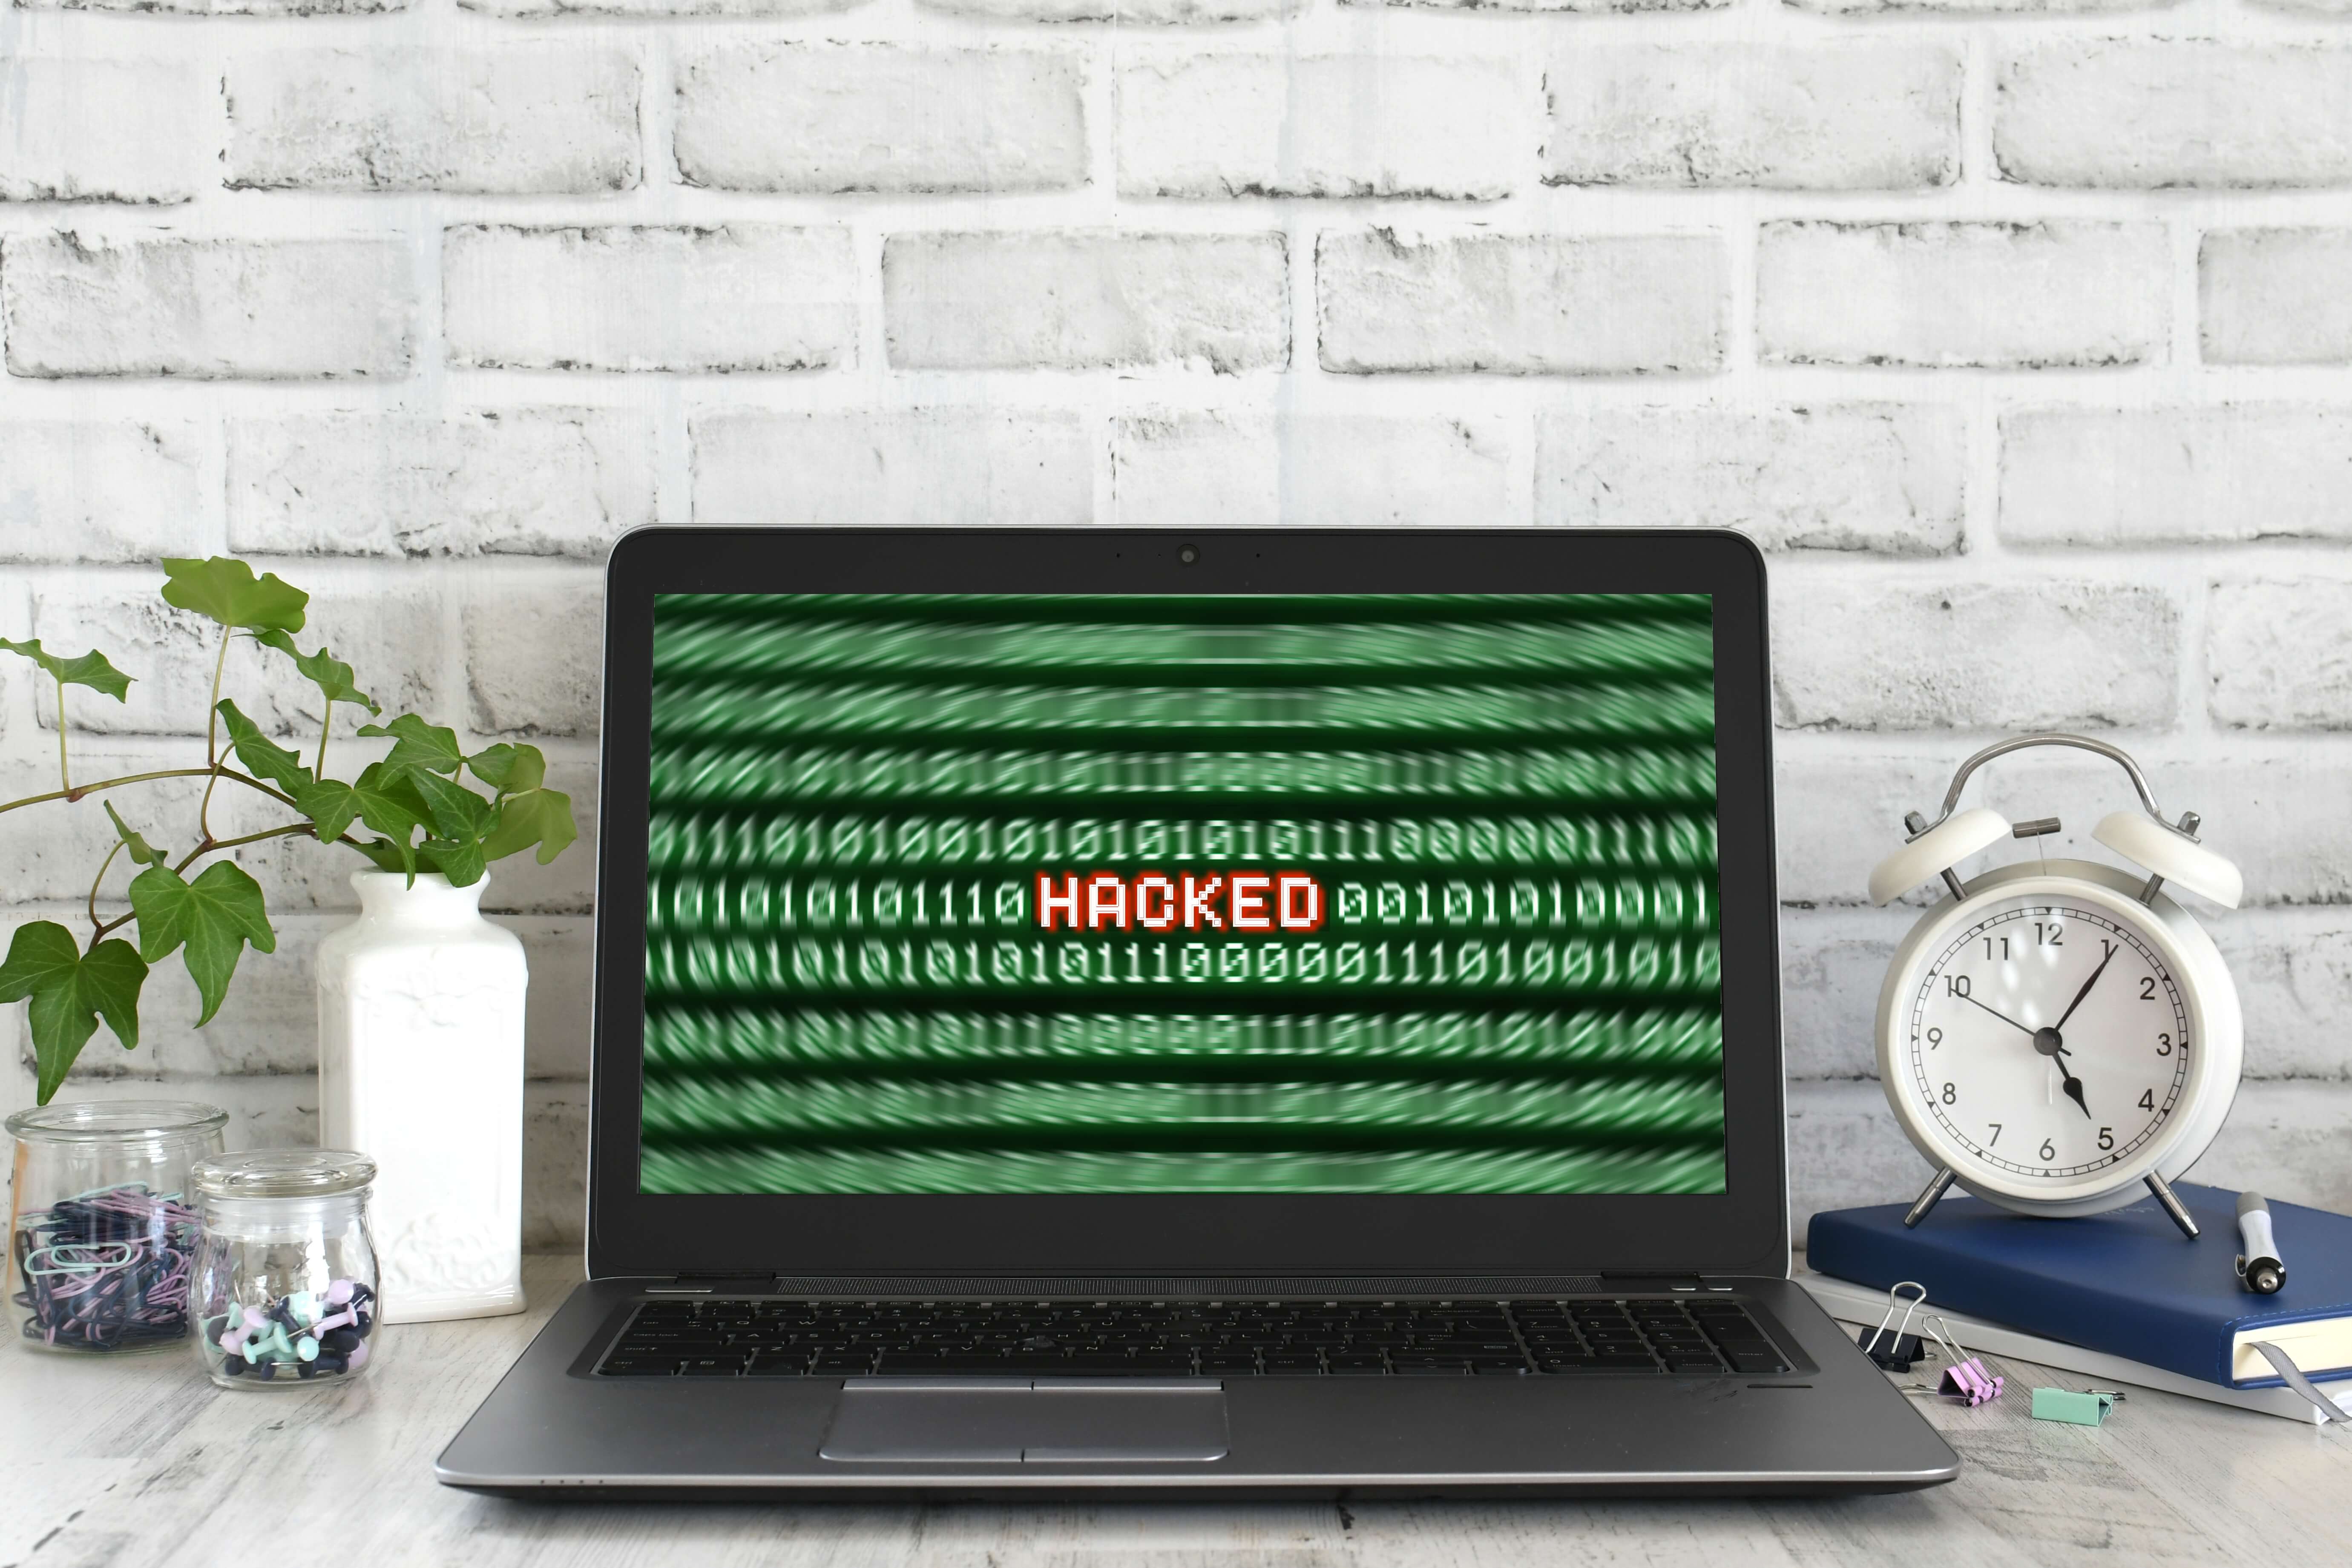 Key Steps to Protect Your Business from Ransomware Attacks